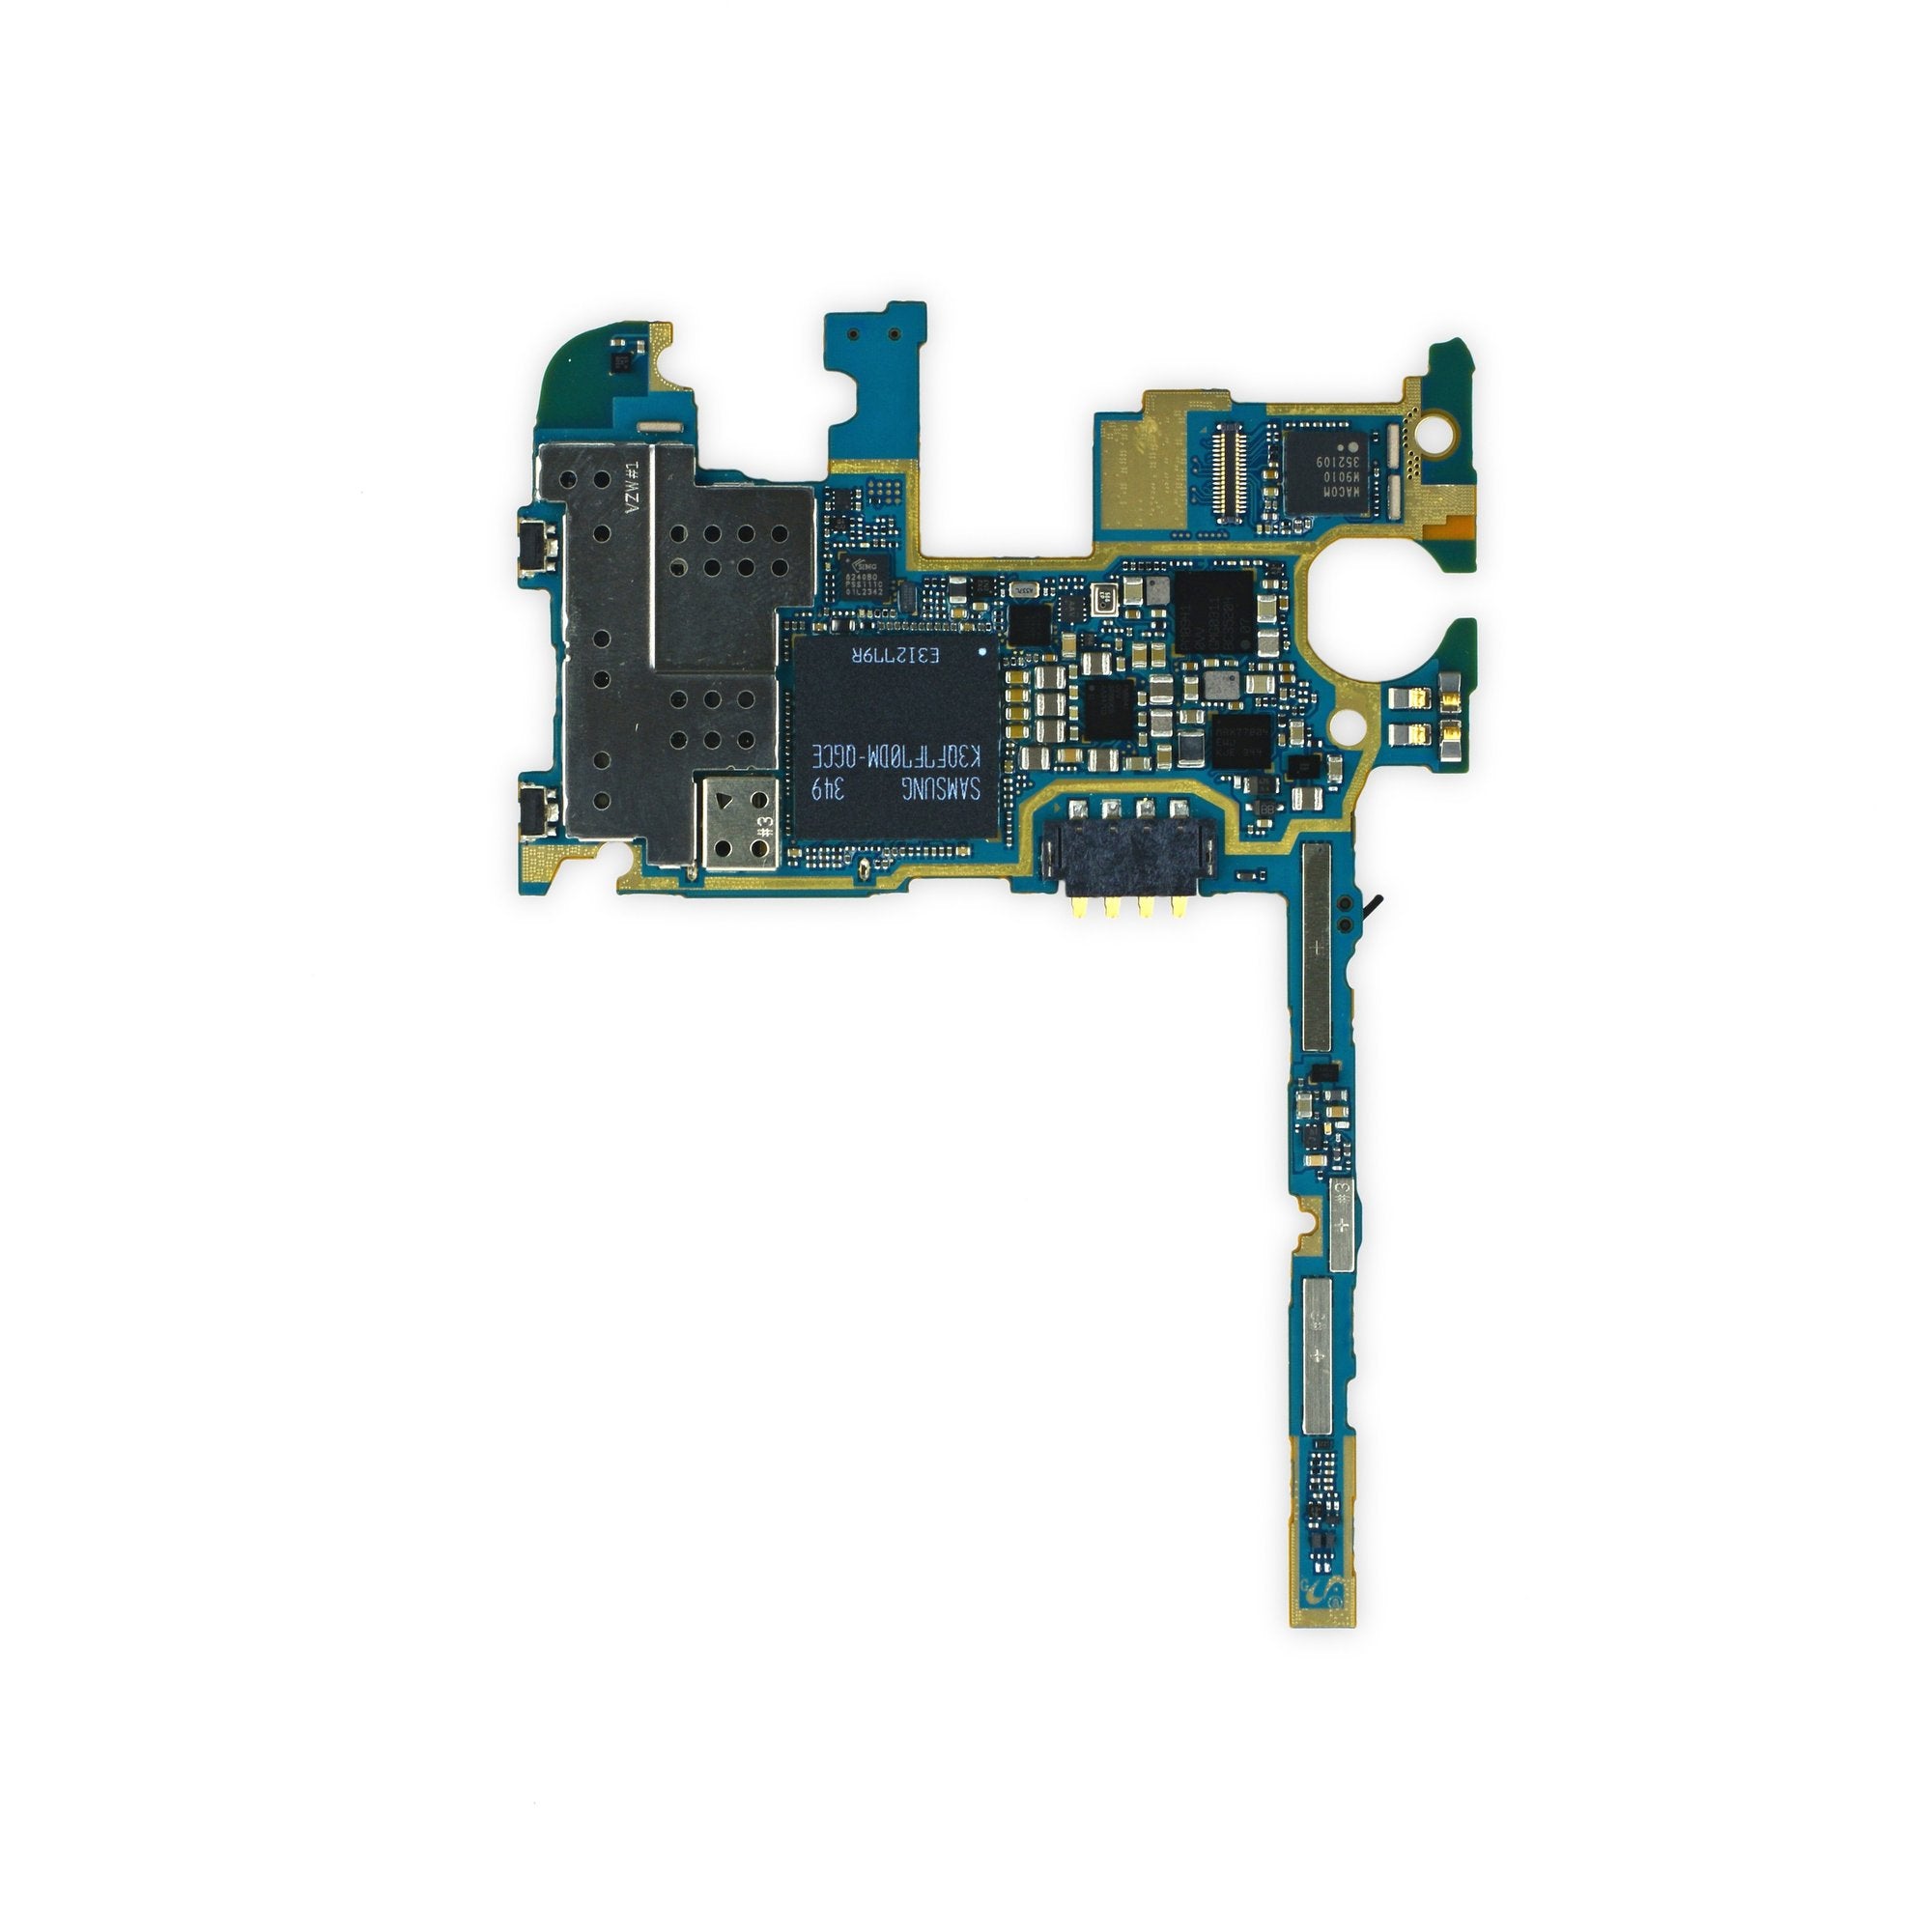 Galaxy Note 3 (Sprint) Motherboard 16 GB Used